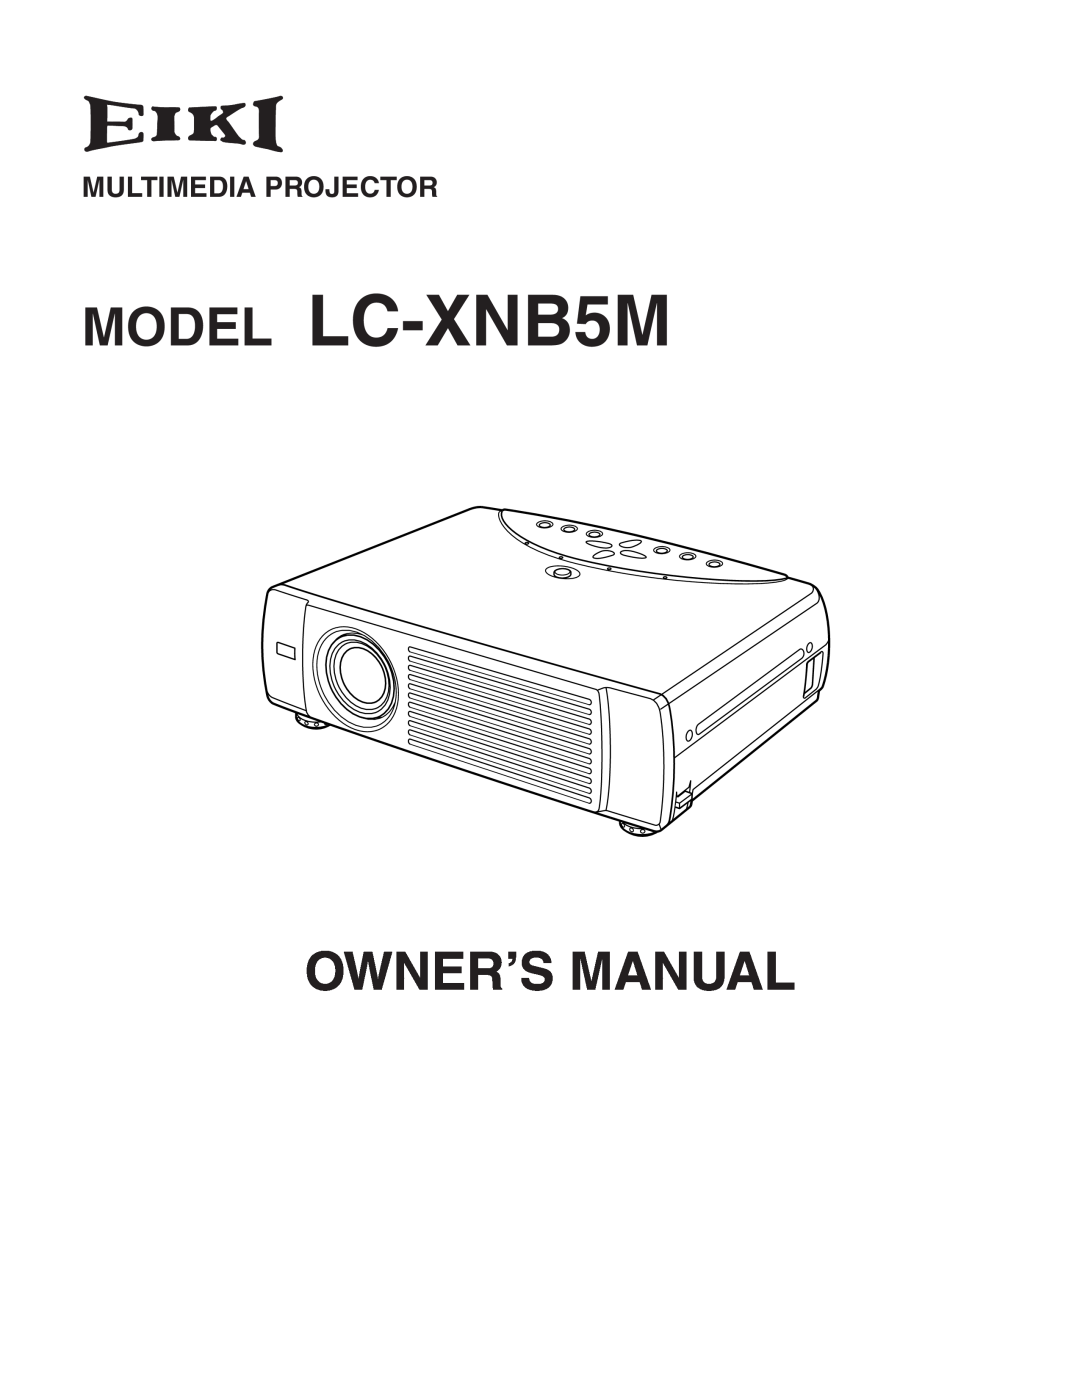 Eiki owner manual Multimedia Projector, MODEL LC-XNB5M, Owner’S Manual 